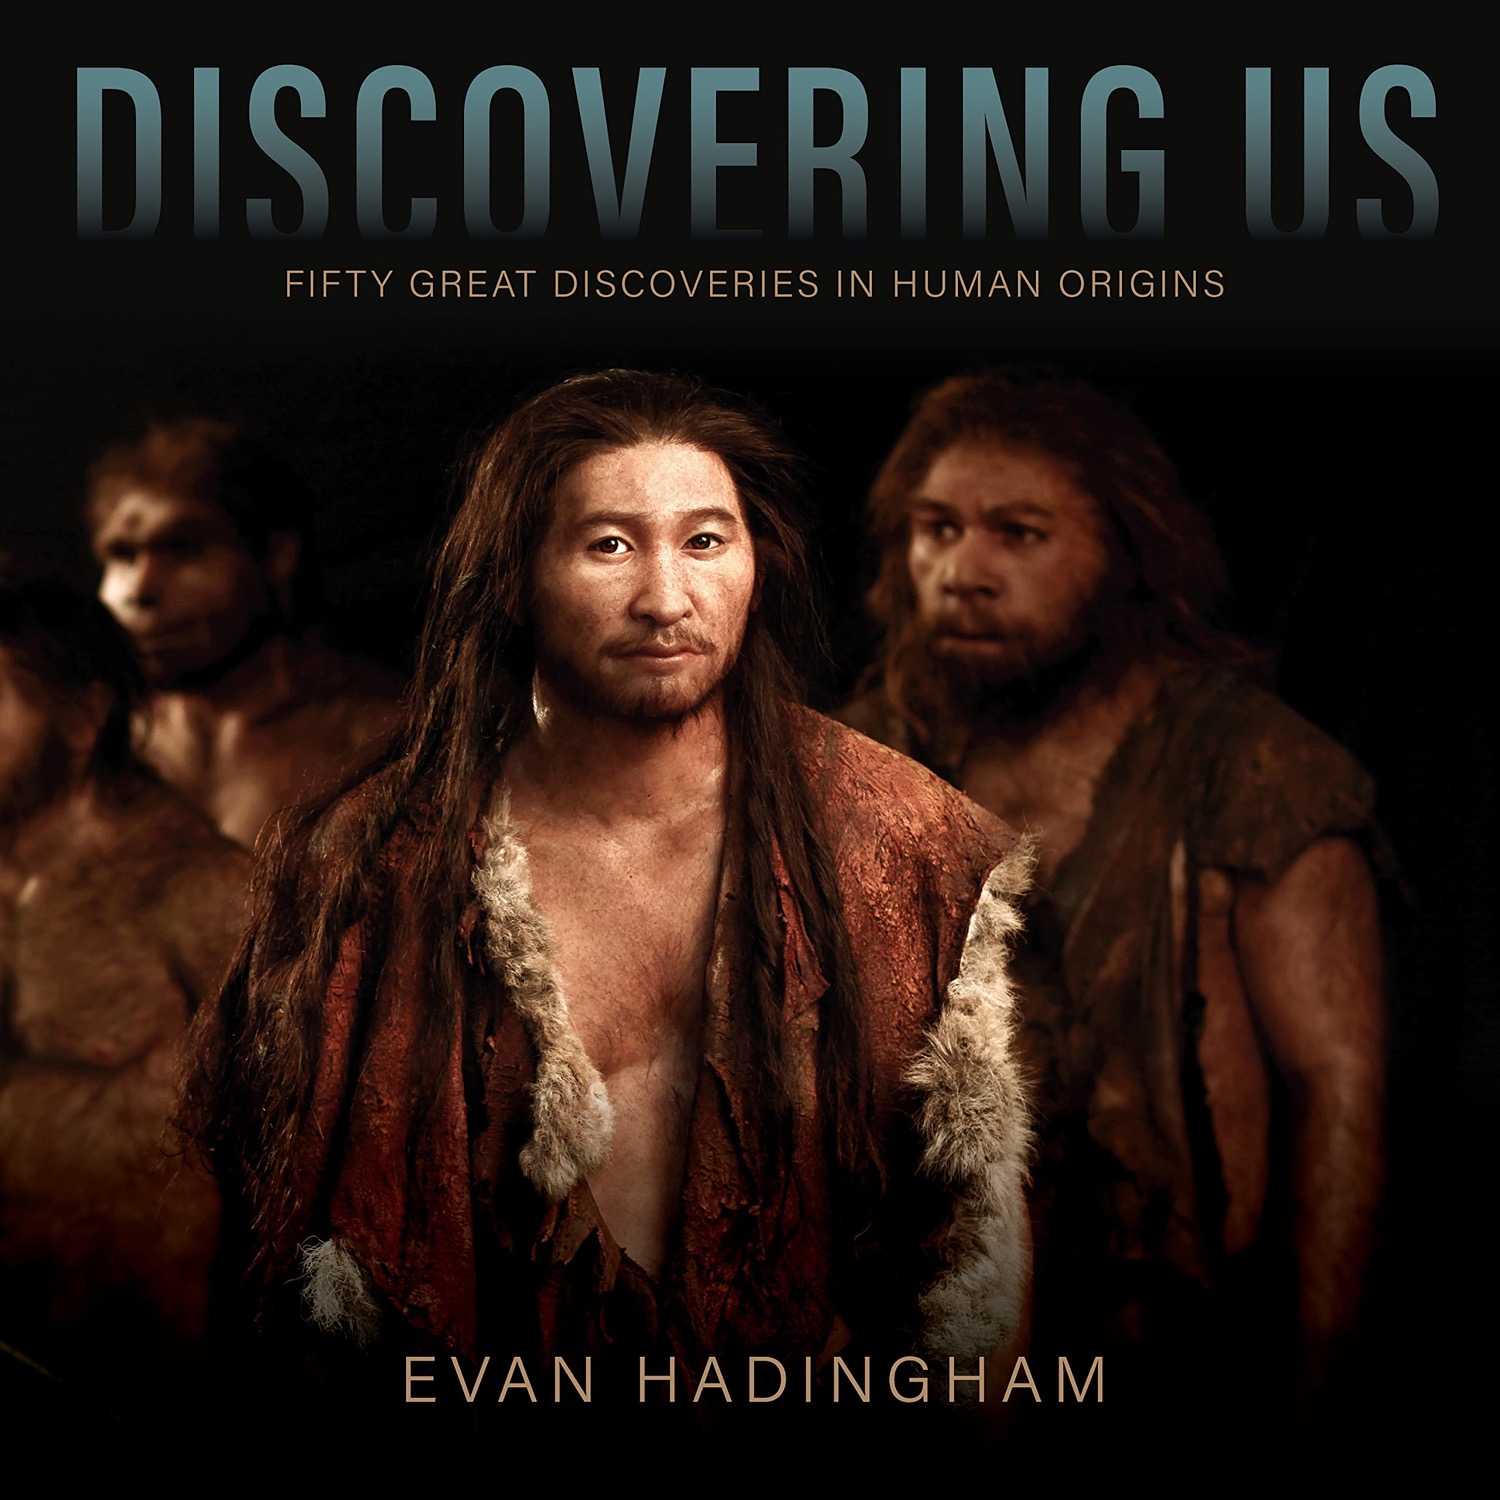 a book cover of speculative photos of early humans wearing tattered hides and cloth, with text 'Discovering Us: Fifty Great Discoveries In Human Origins by Evan Hadingham'